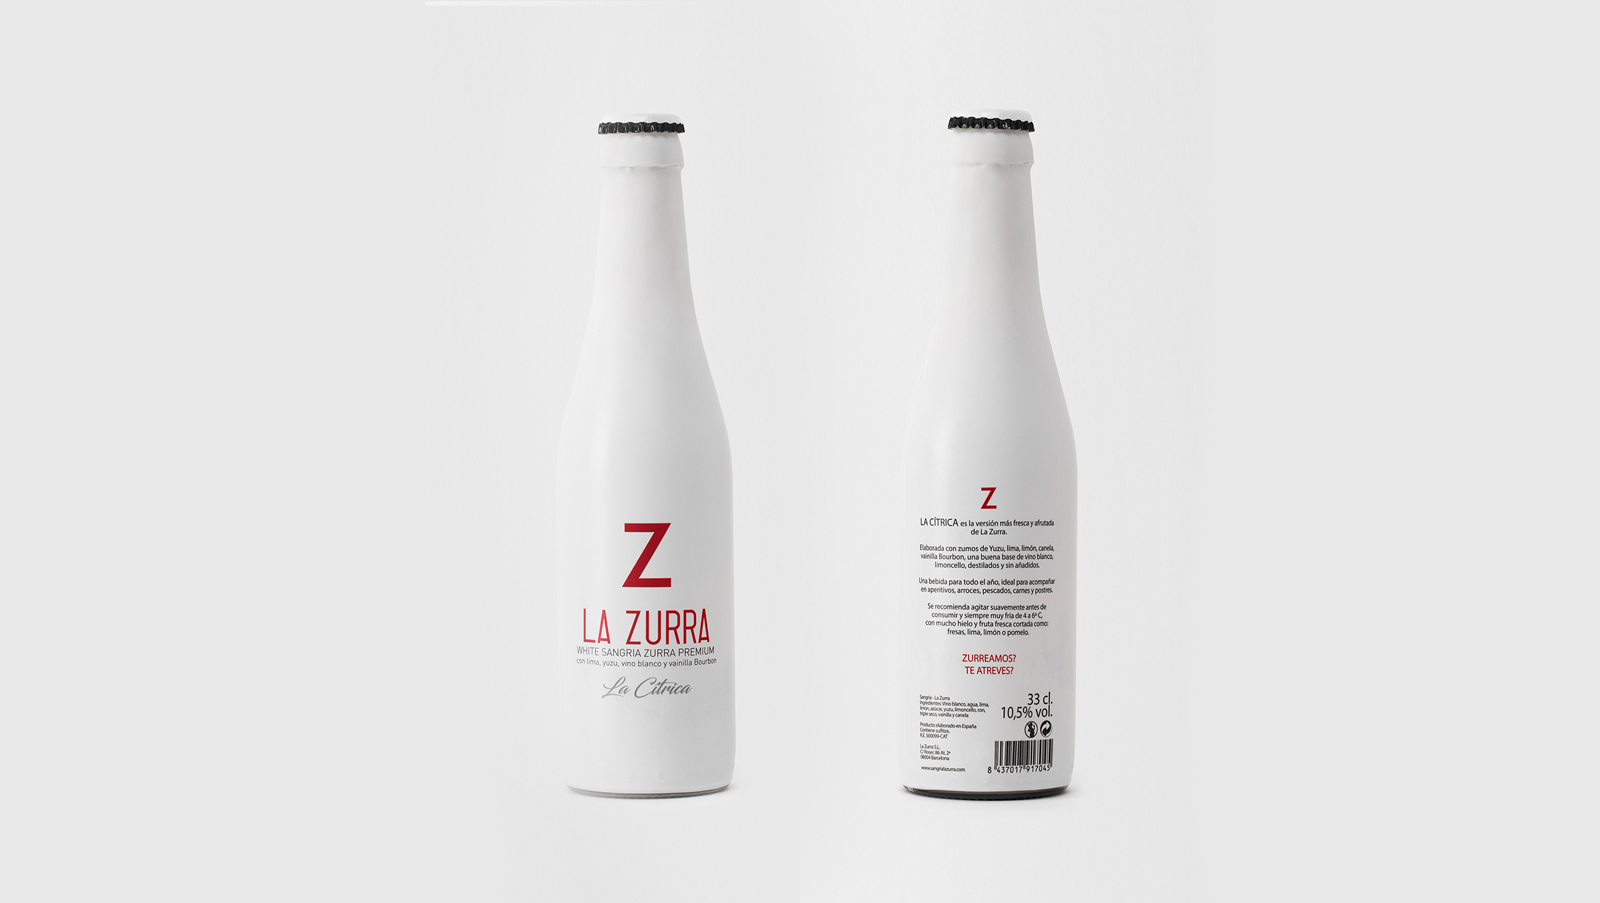 Graphic and creative design of wine labels and packaging for SANGRÍA LA ZURRA